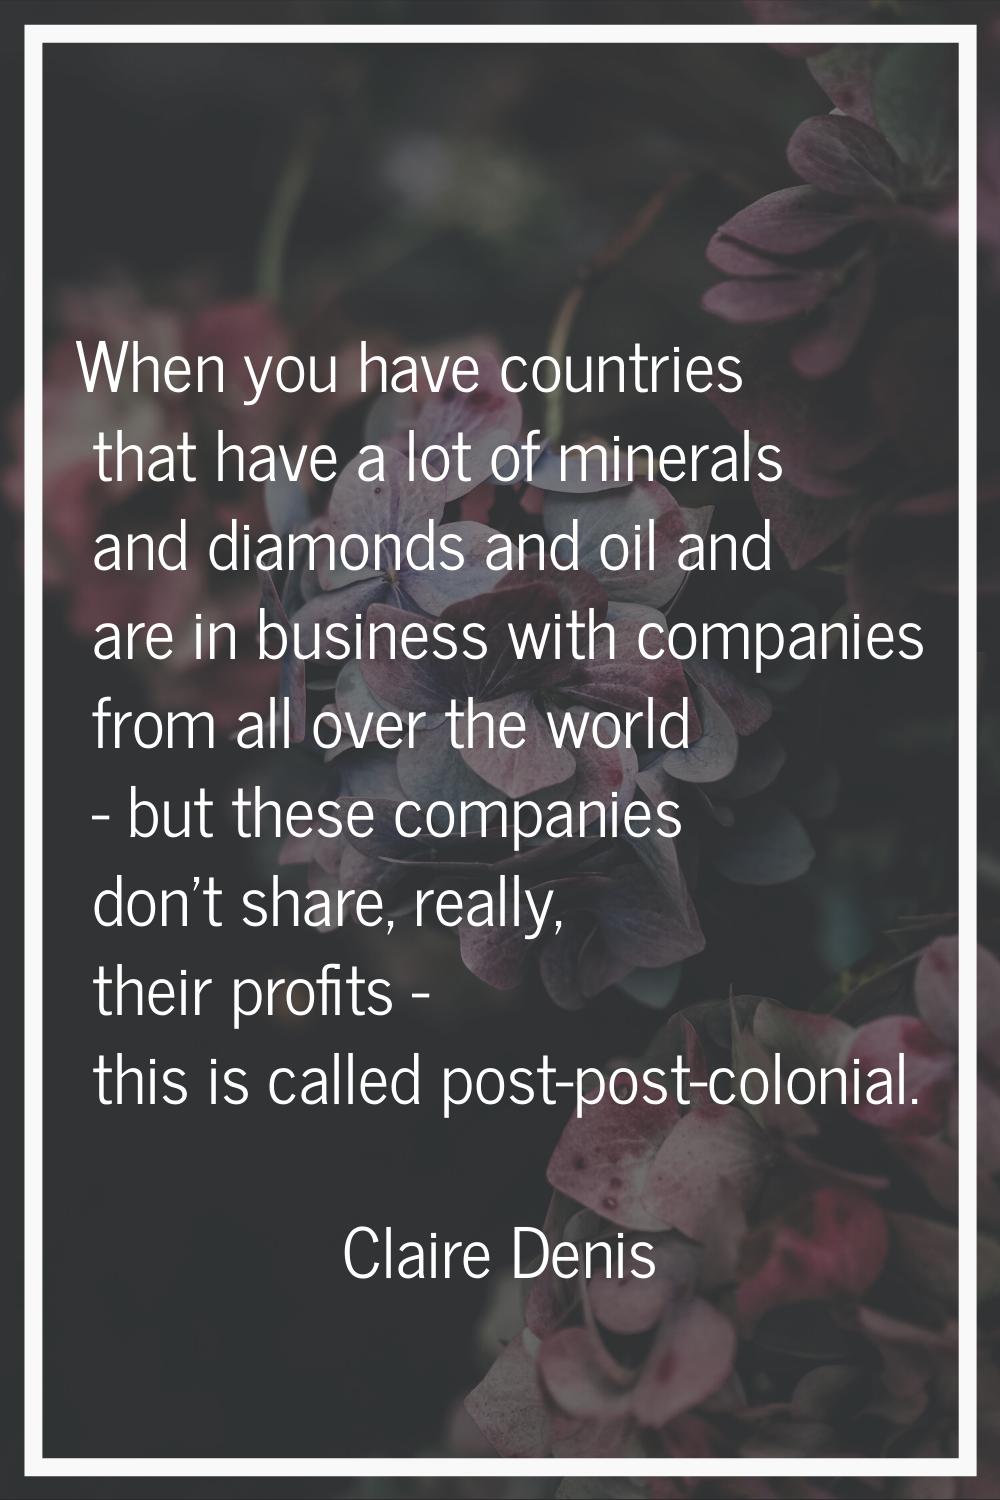 When you have countries that have a lot of minerals and diamonds and oil and are in business with c